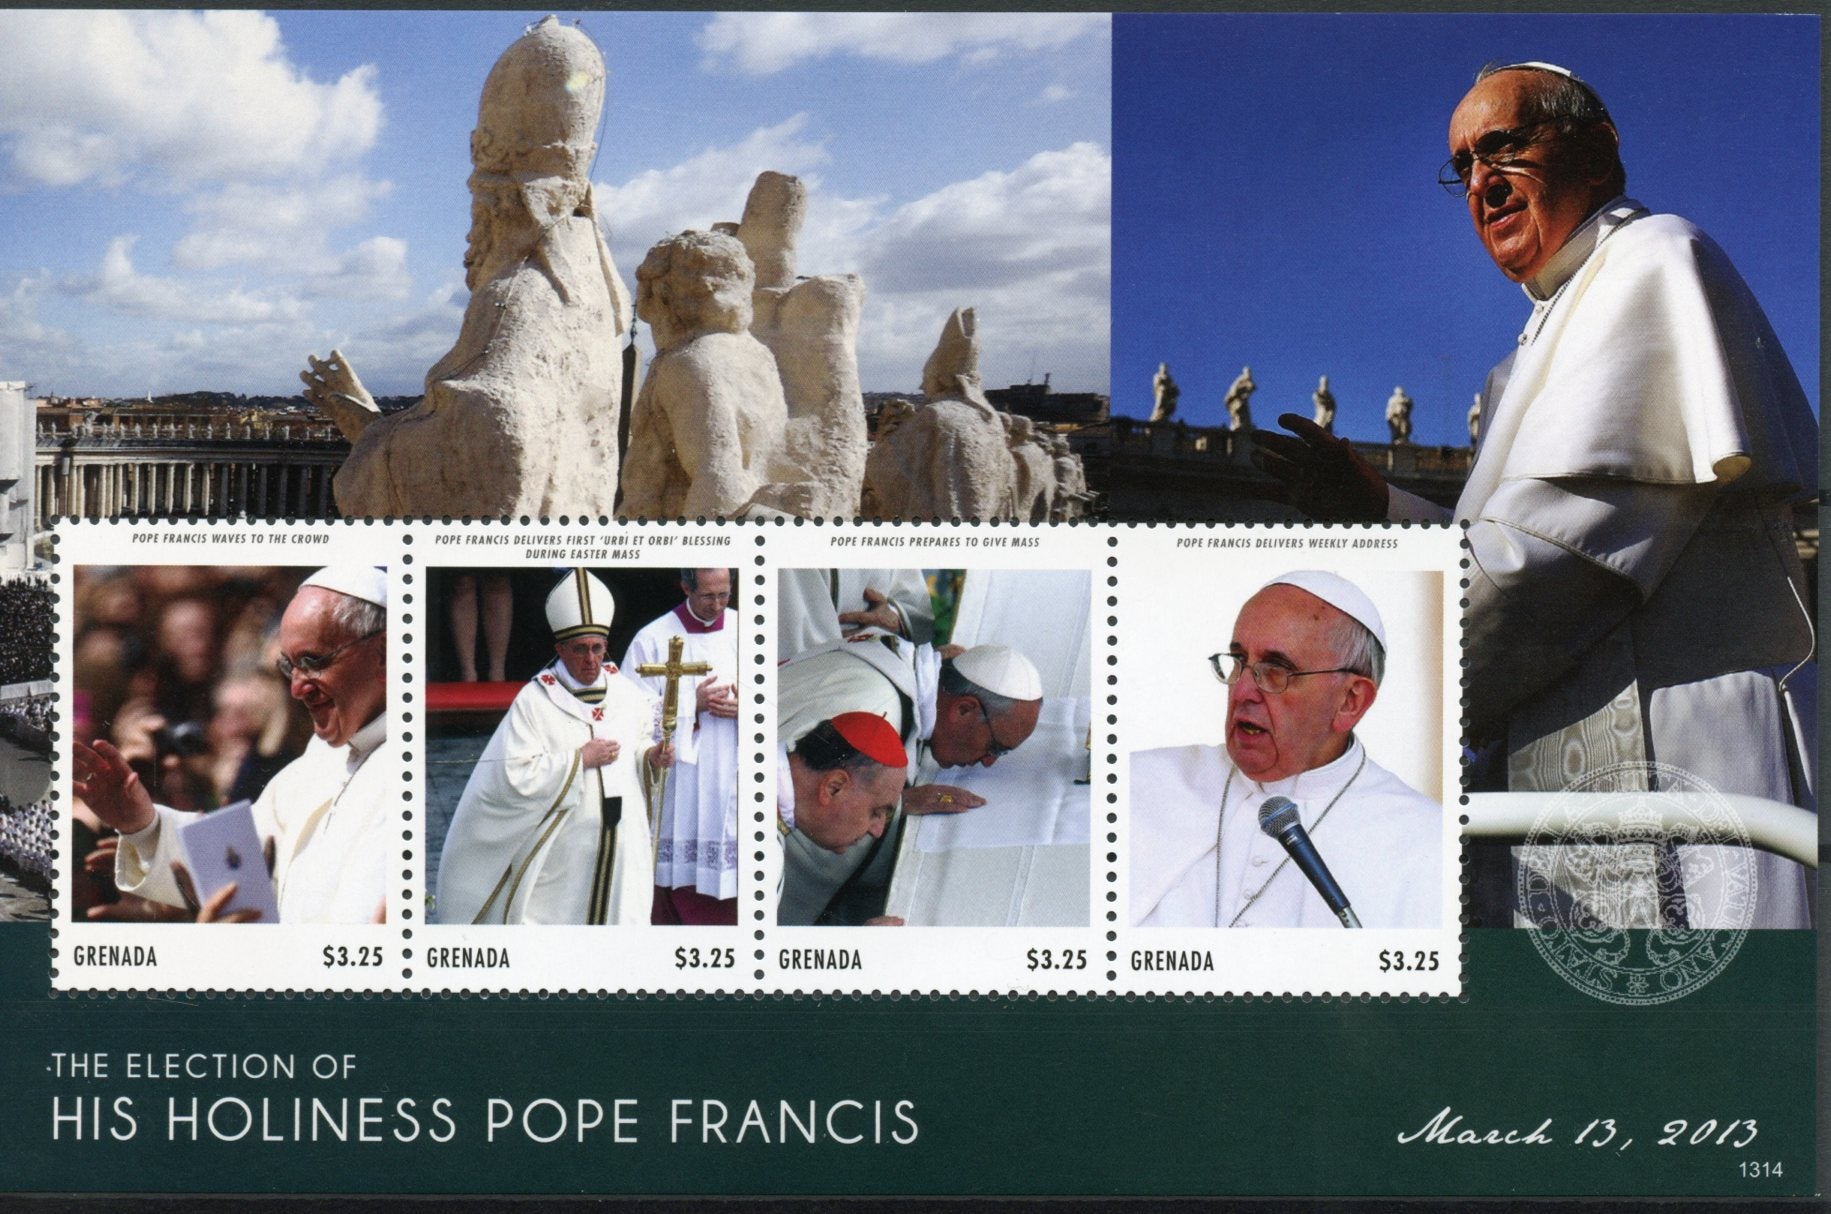 Grenada 2013 MNH Election His Holines Pope Francis 4v Sheet Easter Mass Religion